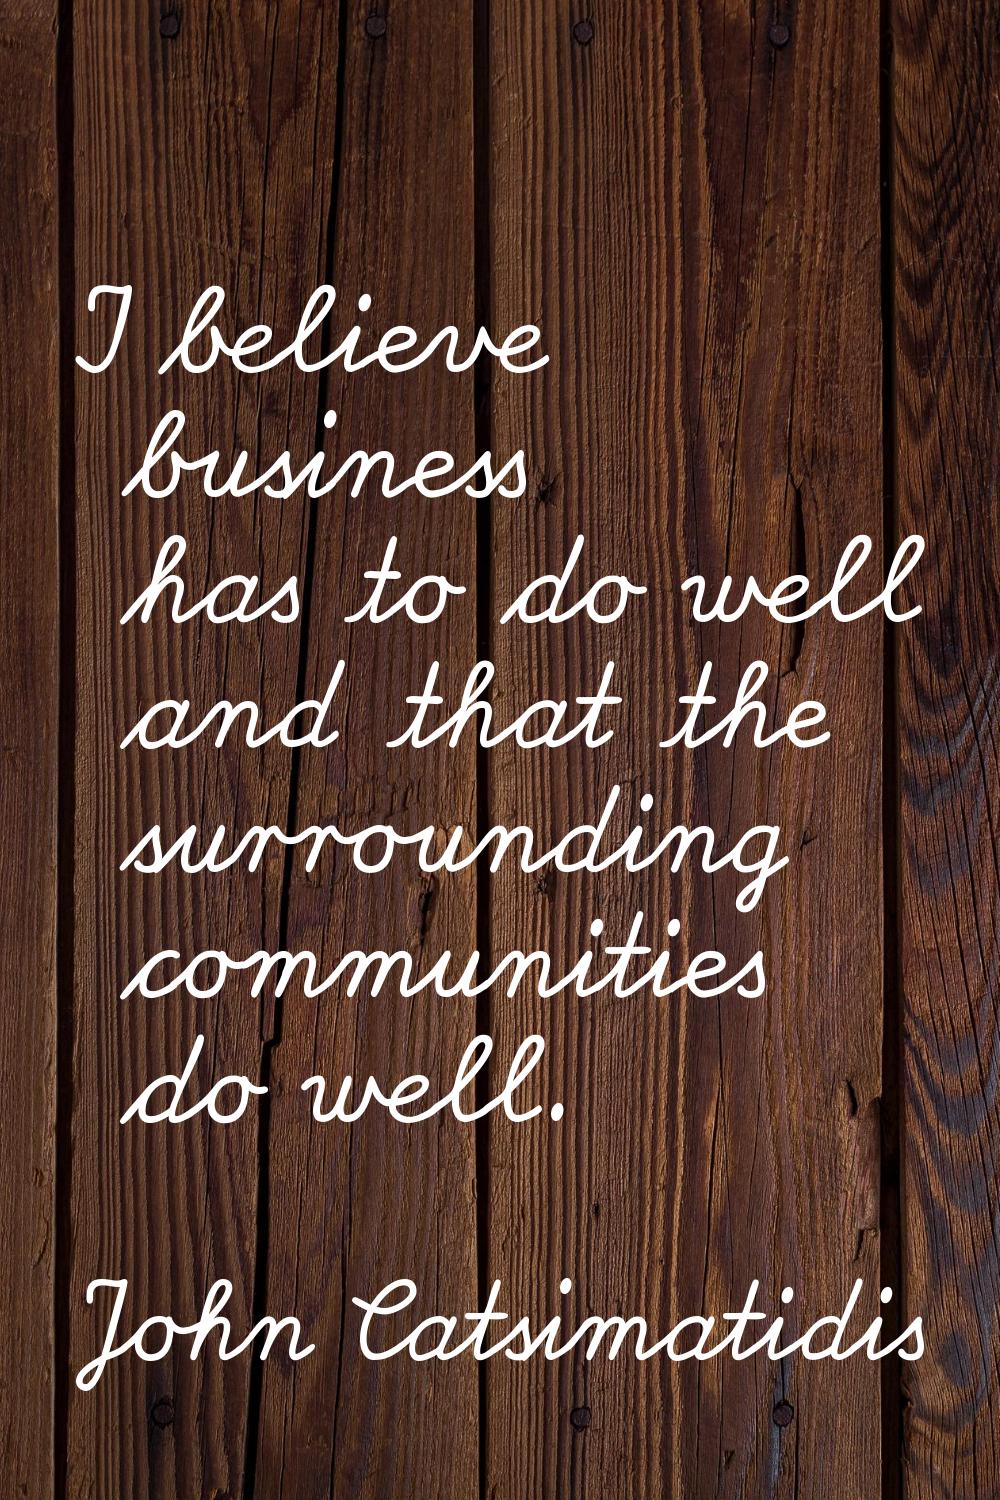 I believe business has to do well and that the surrounding communities do well.